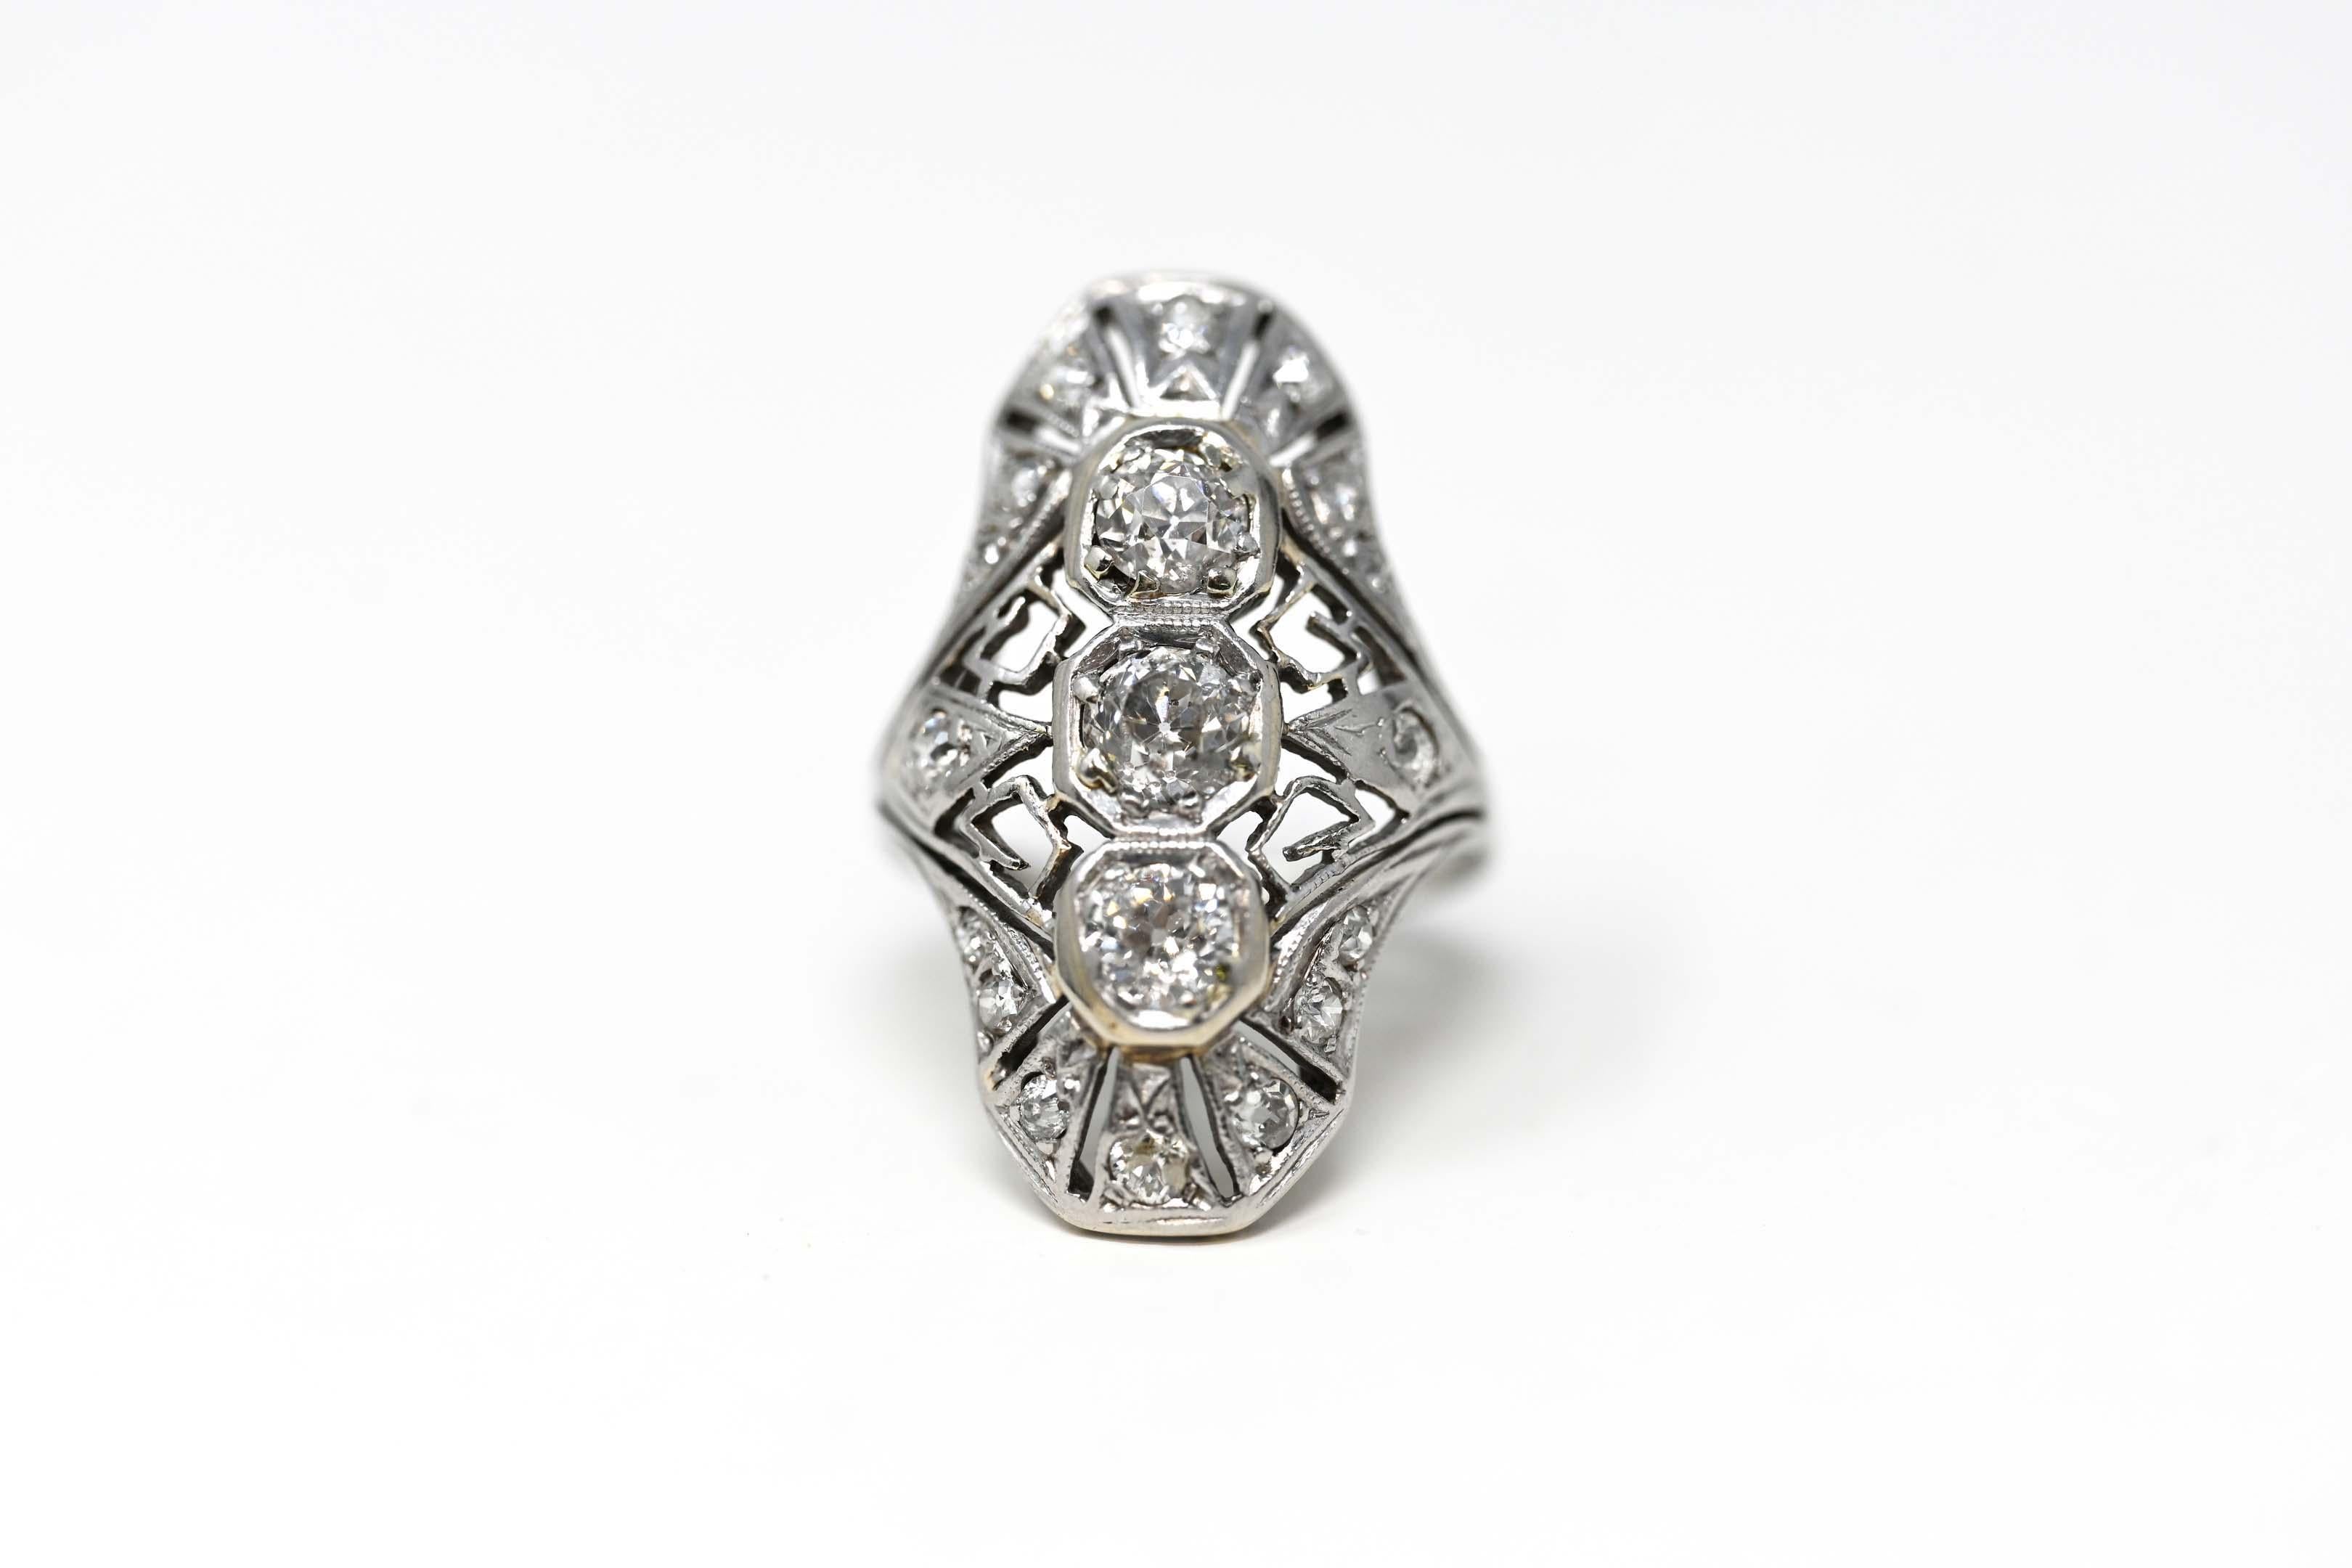 Victorian 14k with gold and diamonds ladies ring. Set with 16 old cut diamonds total weight .35 ct. The central diamond measures 5mm in diameter, weighs approximately .45 ct, clarity VS-SI, color HI. Two more diamonds approximately 4.4 mm in